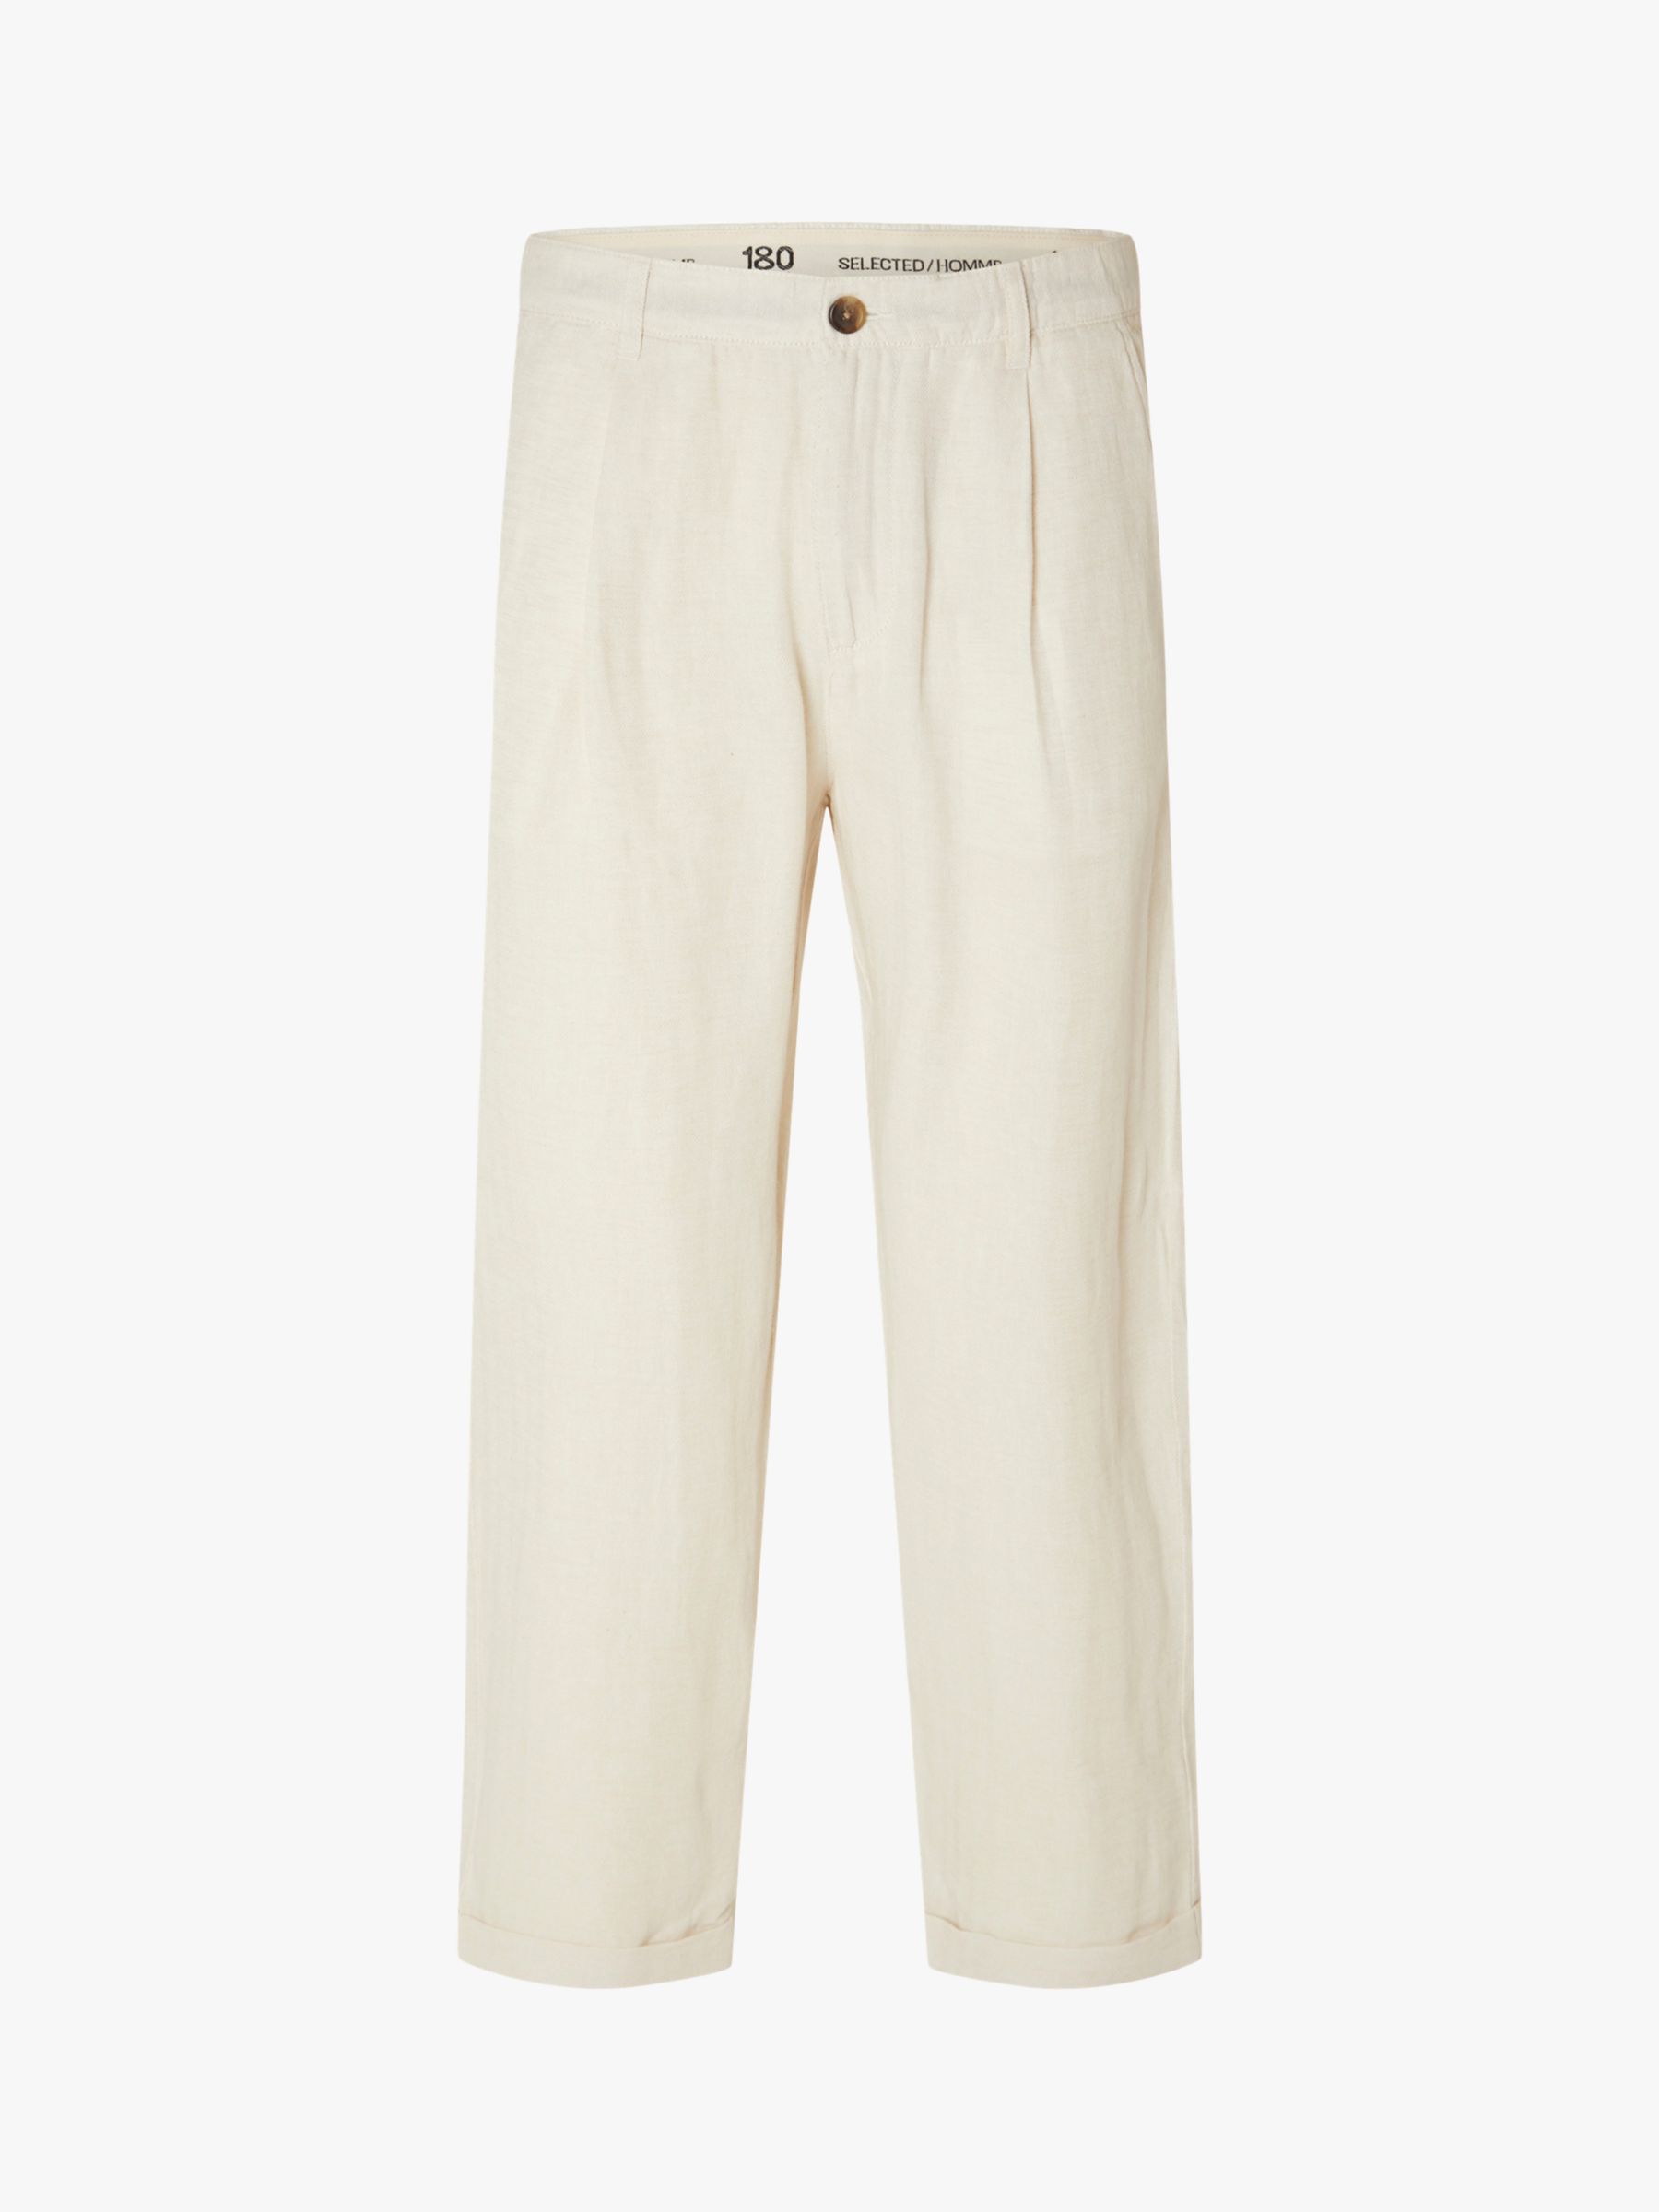 SELECTED HOMME Relaxed Chino Trousers, Oatmeal, 30R